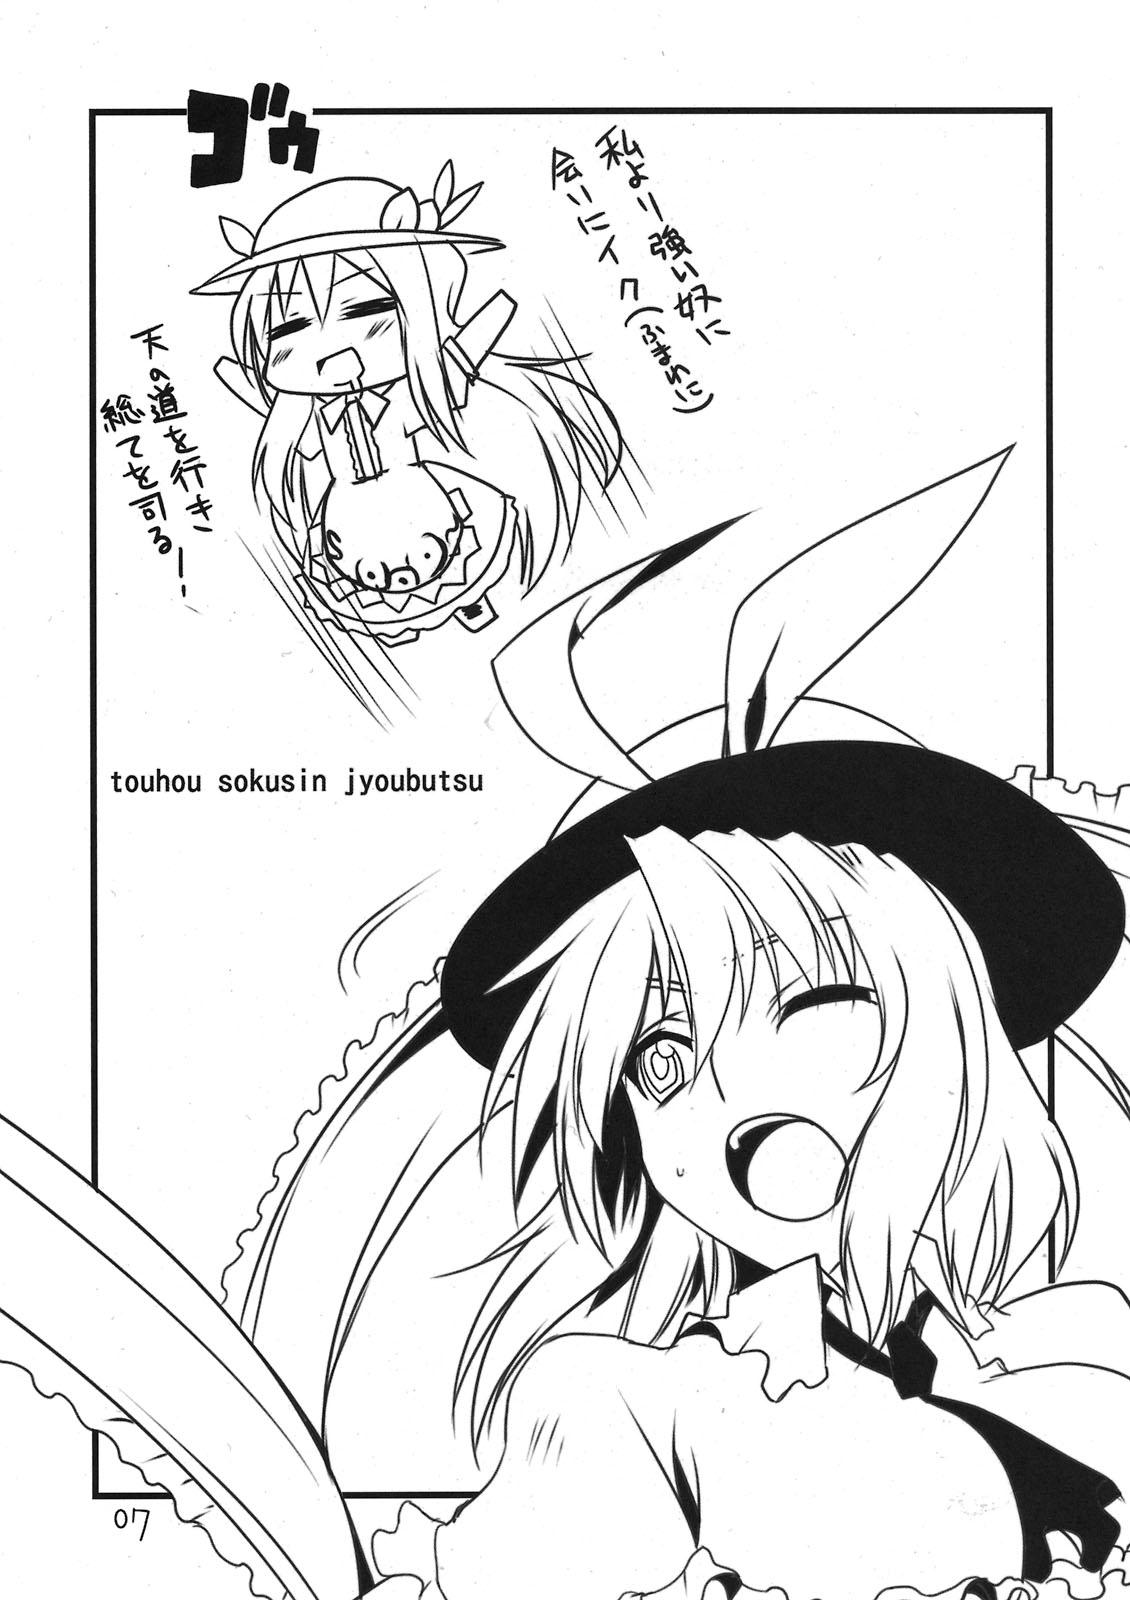 Real Amatuer Porn Touhou Sox In Joubutsu - Touhou project Cum On Face - Page 7